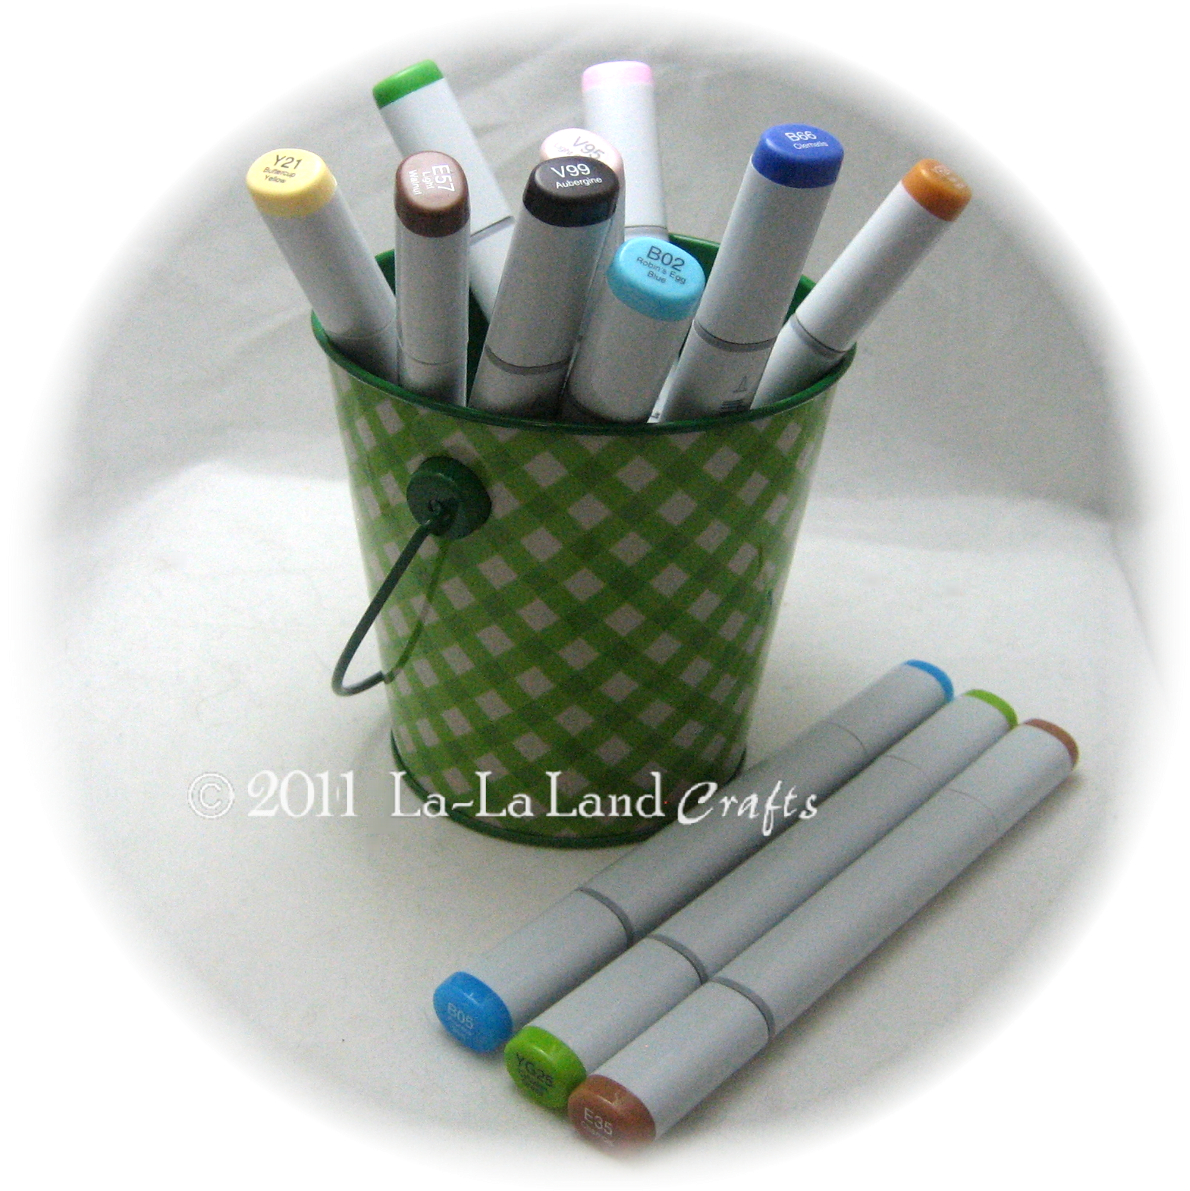 La La Land Crafts Inspiration And Tutorial Blog Would You Like To Win 12 Copic Markers